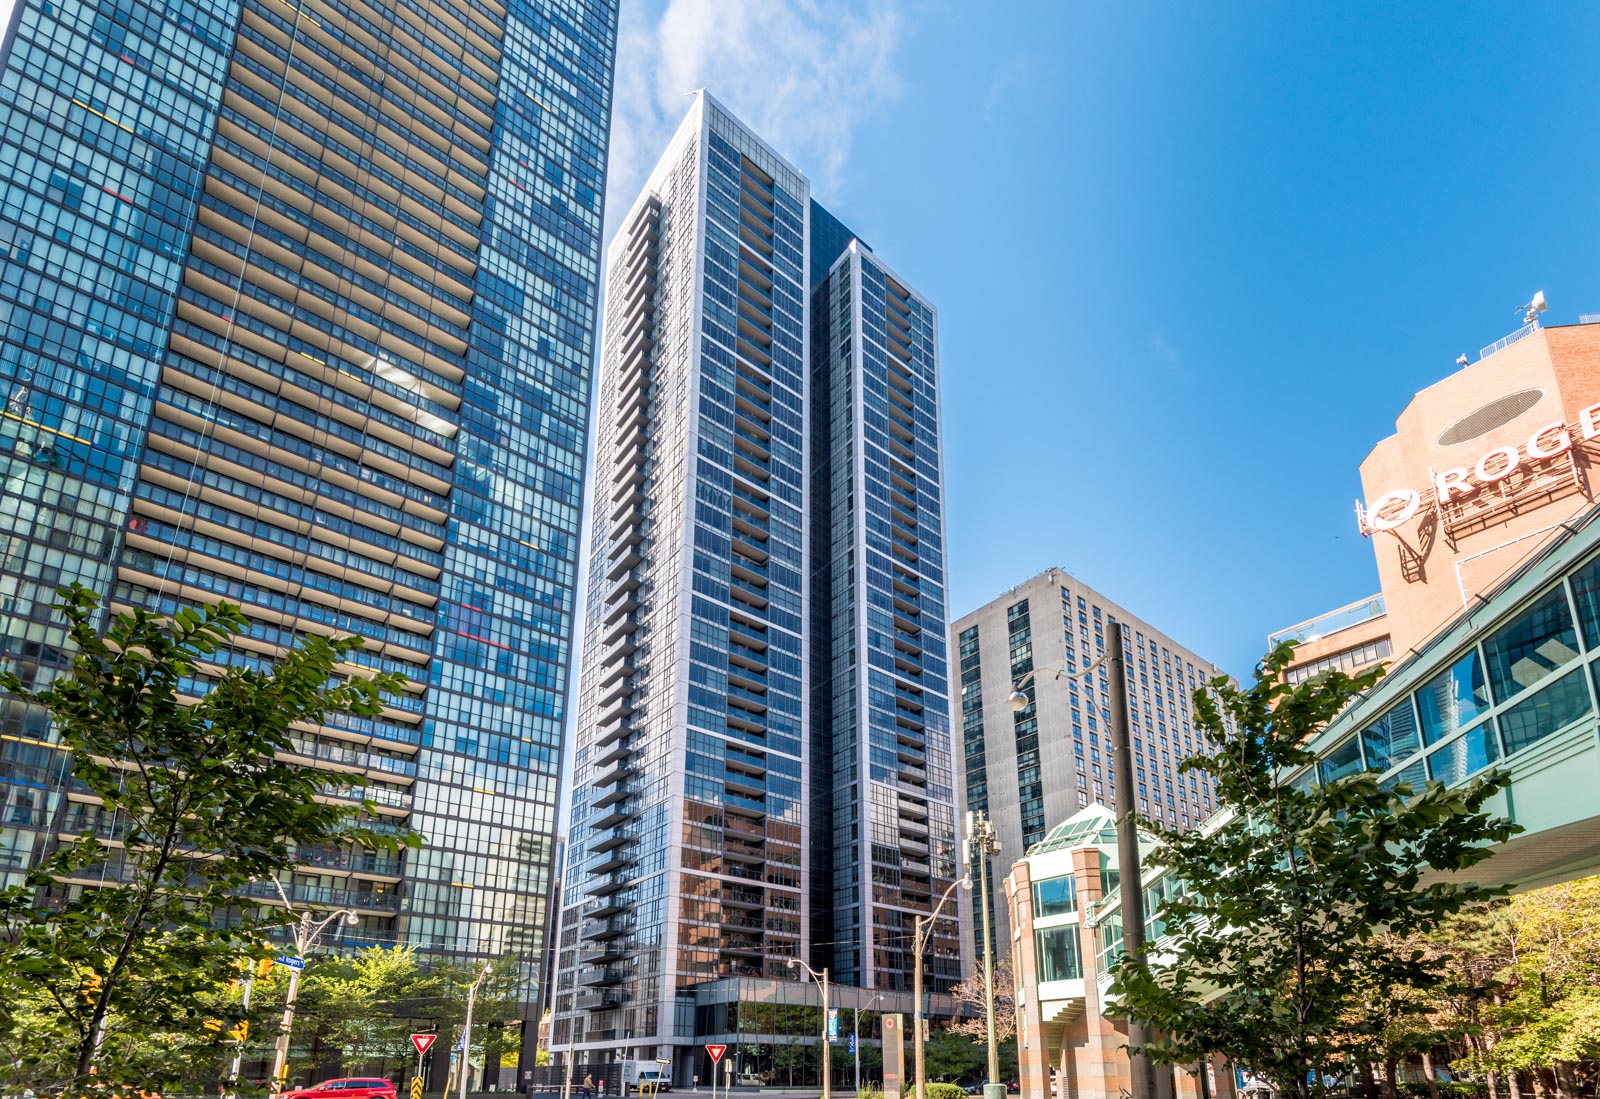 Daytime across-the-street view of The Couture Condos, a 42-floor building with highly-reflective glass.